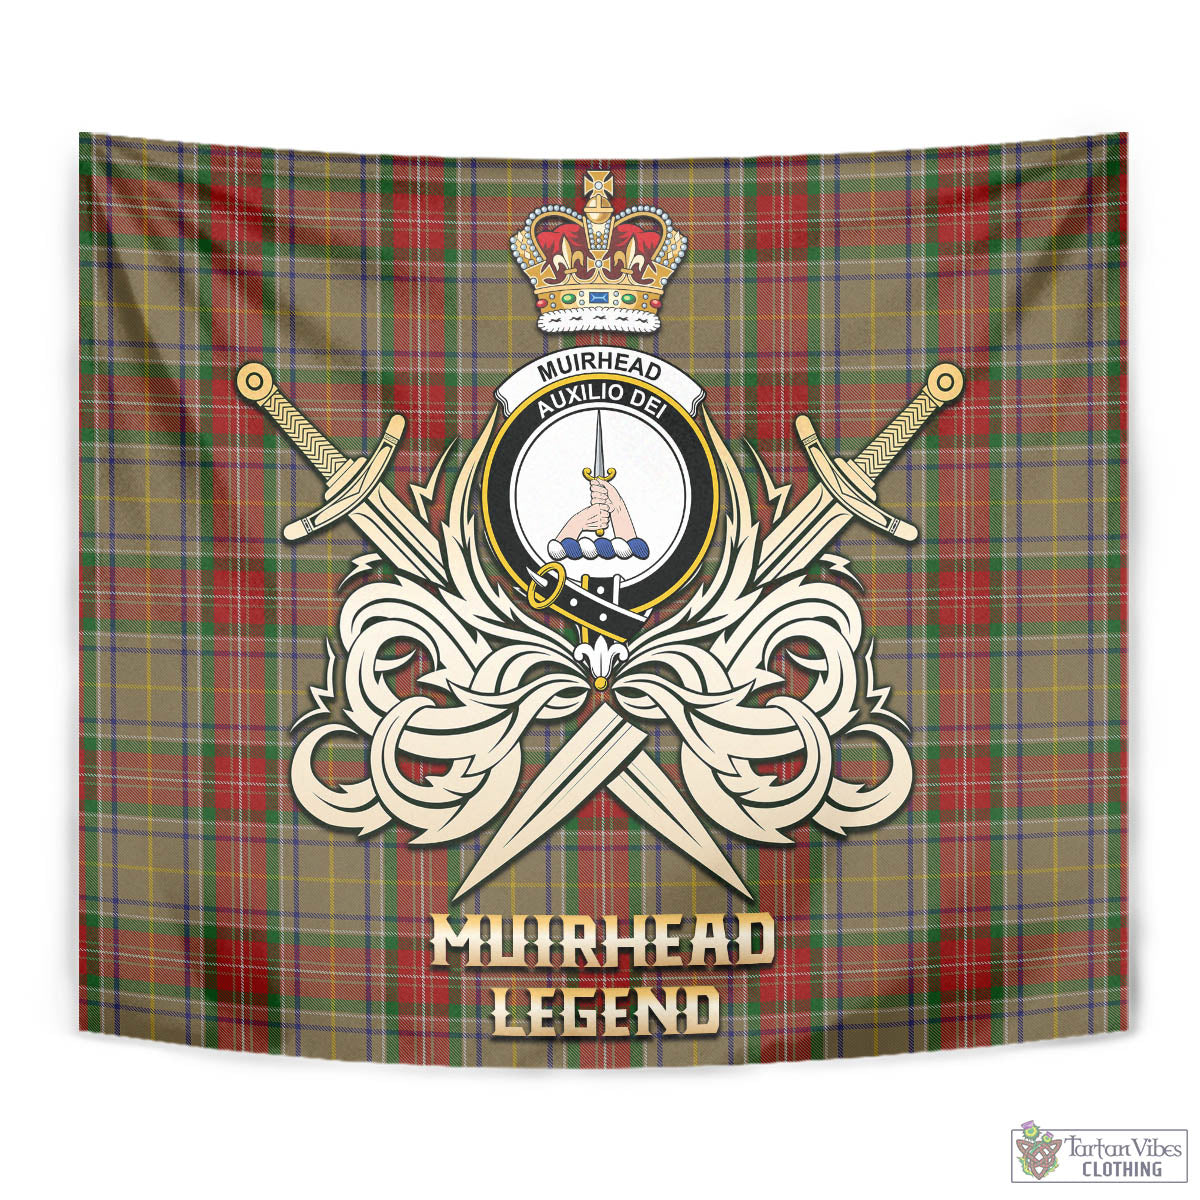 Tartan Vibes Clothing Muirhead Old Tartan Tapestry with Clan Crest and the Golden Sword of Courageous Legacy